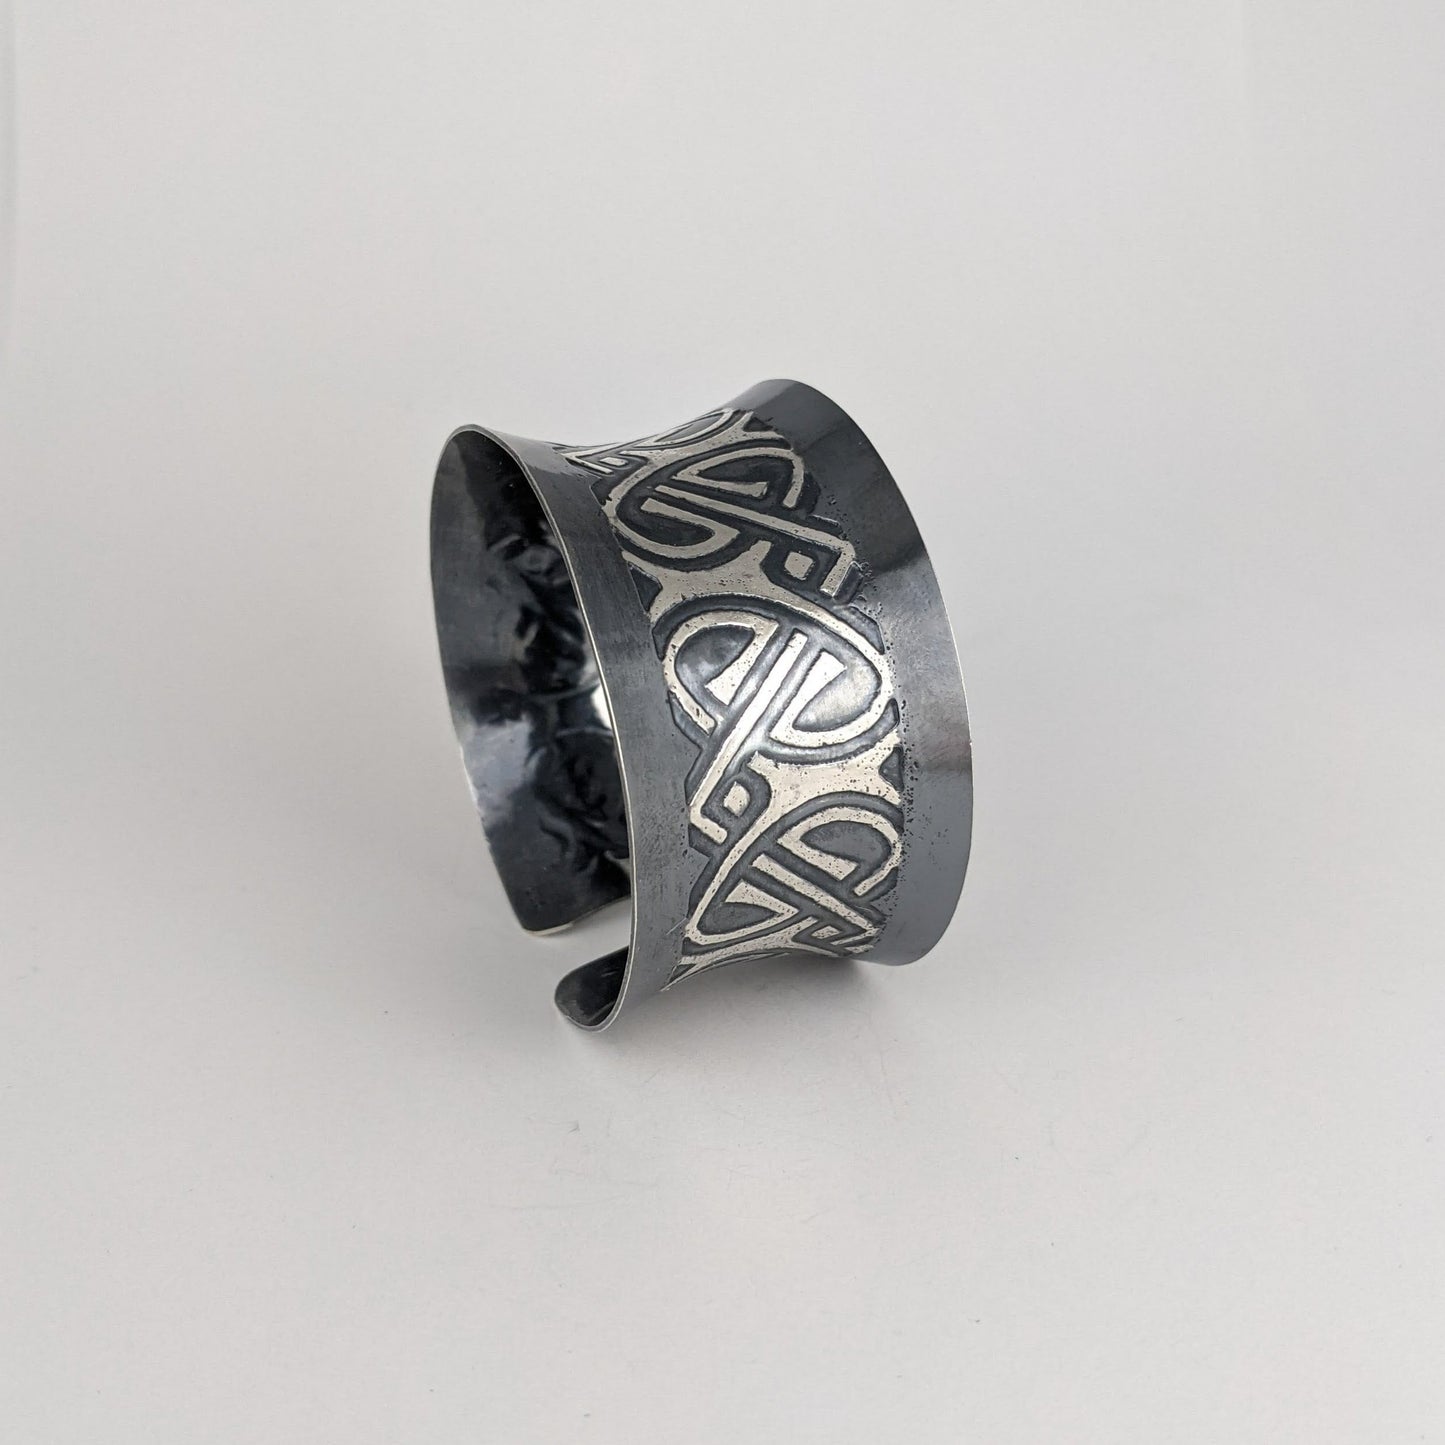 C168.27bs Wide Sterling Silver Cuffs, 92.5 SS, hand-formed, Art Deco etching and patinated